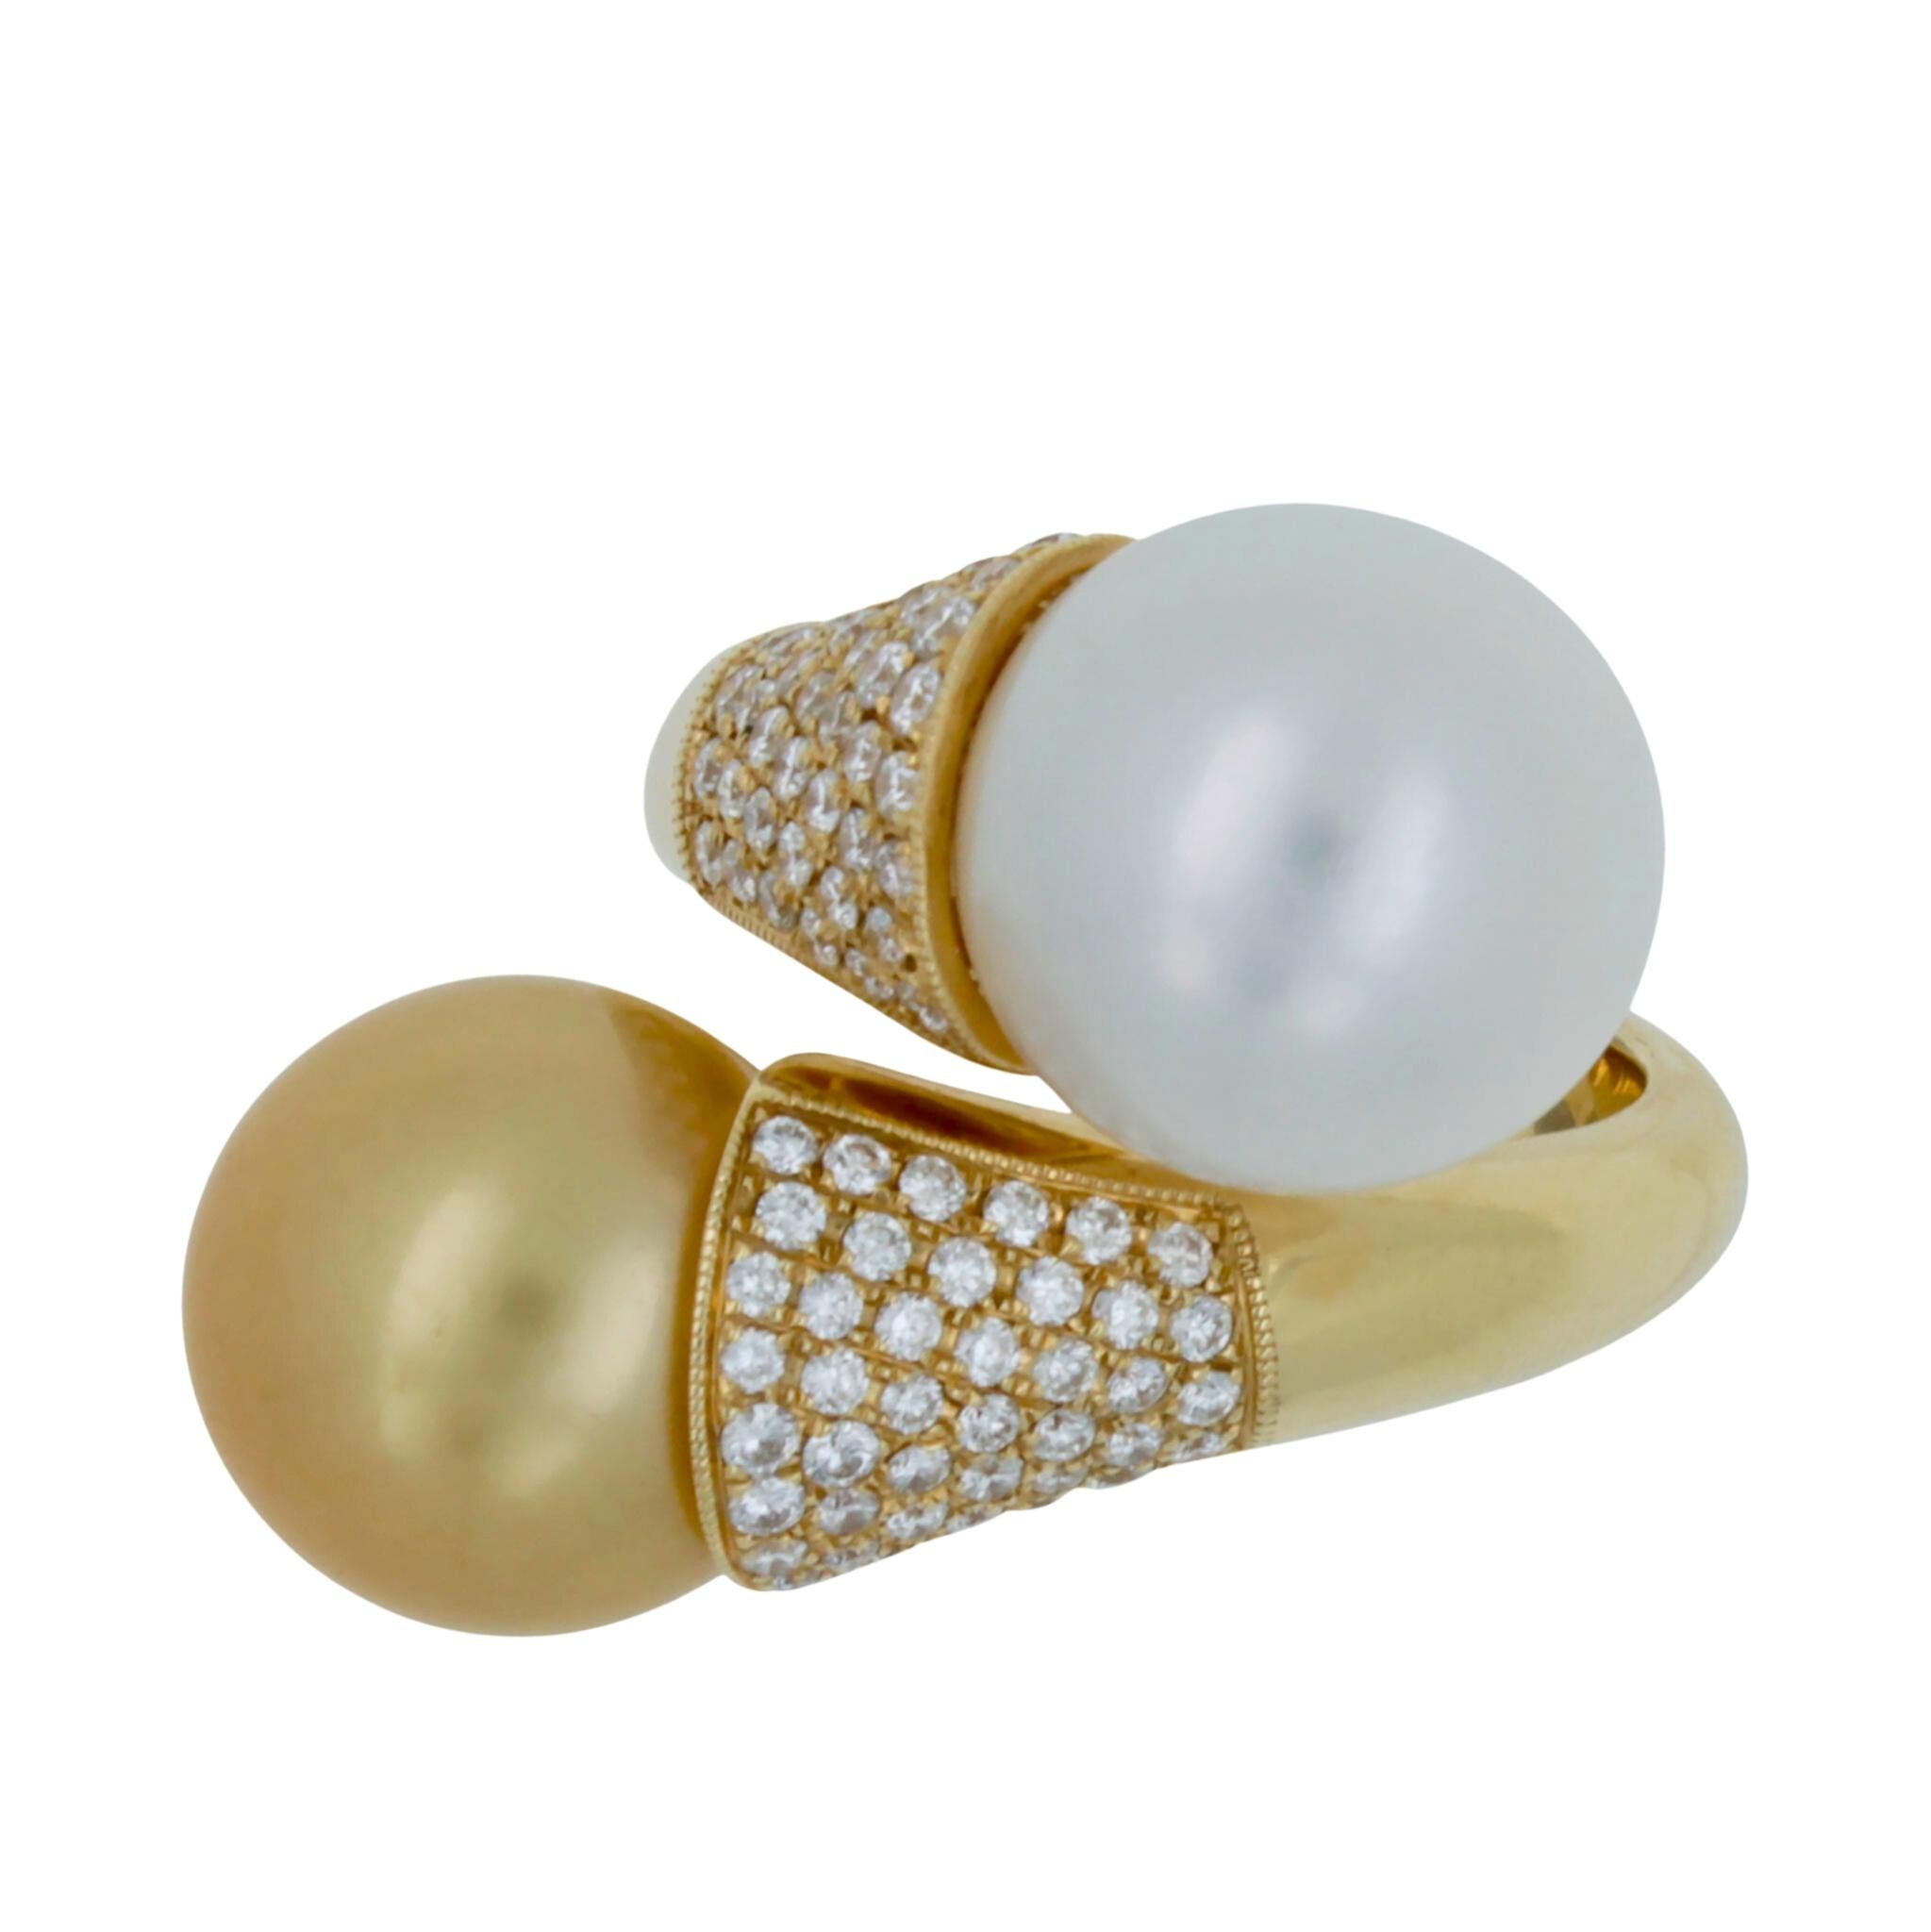 14 Yellow Karat Gold
Natural South Sea Pearls & Genuine Diamonds 
AAA Quality Pearls
0.50 CTW Diamonds - DEF / VS Color Clarity Grades
13 MM South Sea Pearls
Current Regular Size 7 – Resizable upon request
Designed & Handmade in Washington, D.C. USA